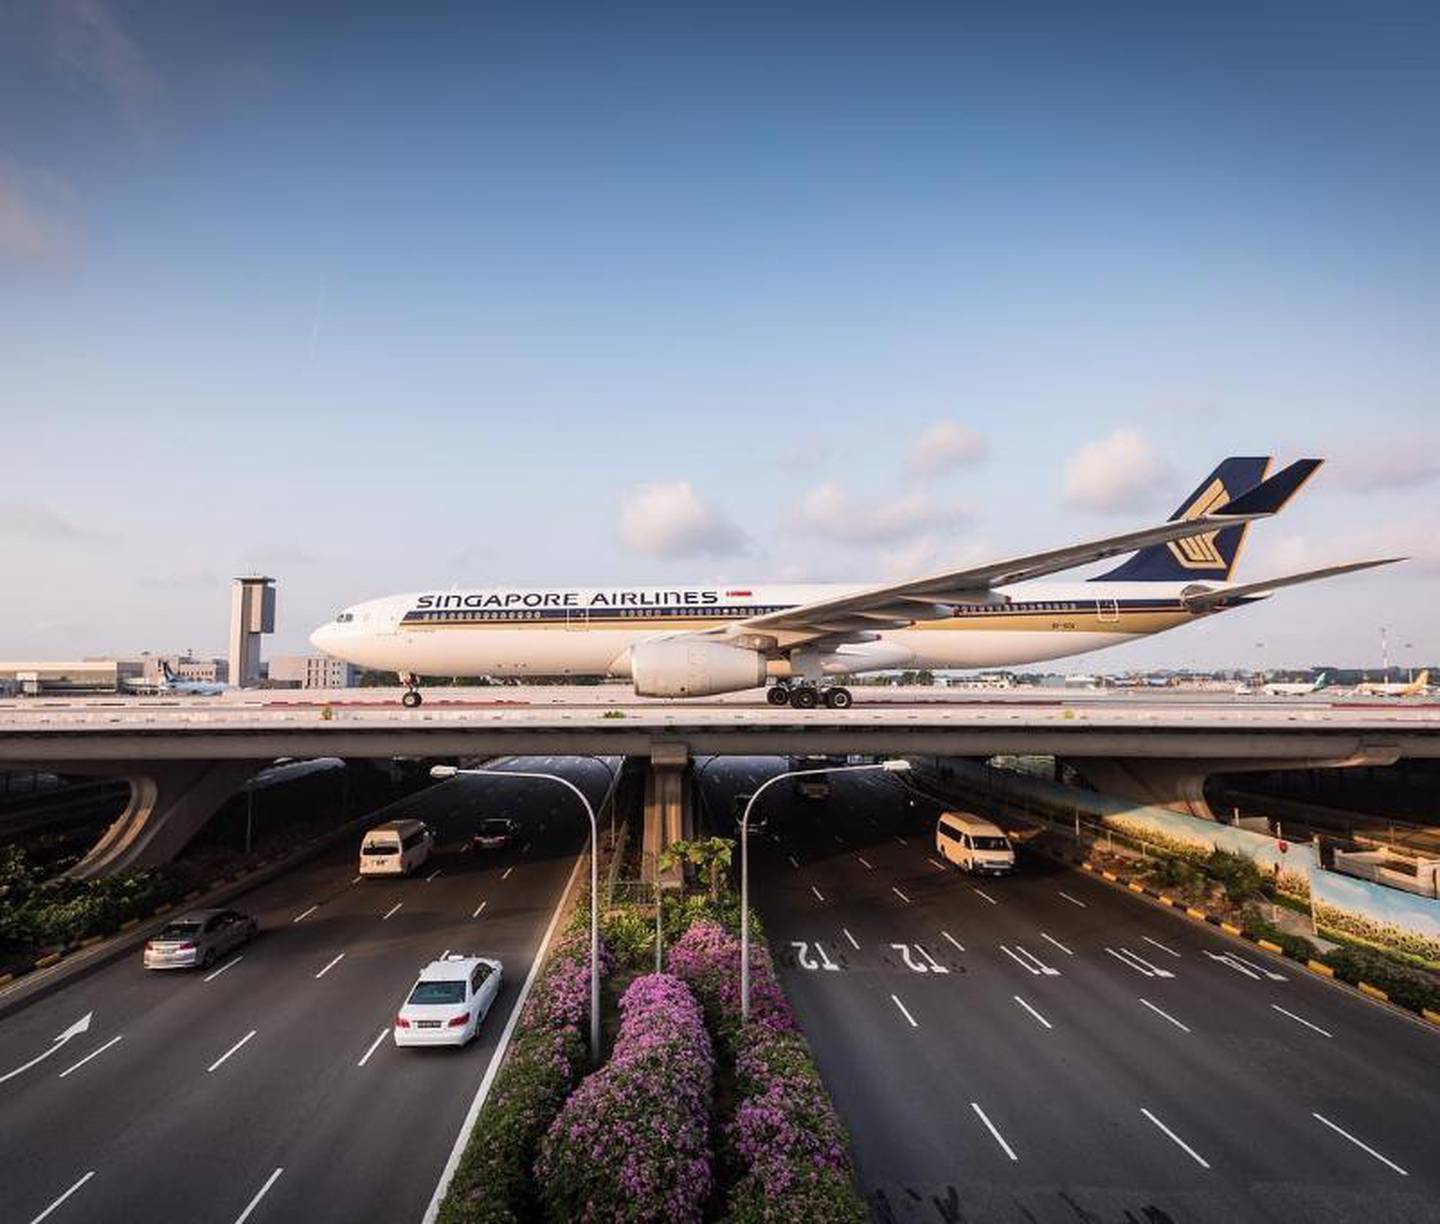 A new taxiway, extending 40 kilometres, will be built to link Changi East with the existing runways at Changi Airport. Photo: Changi Airport